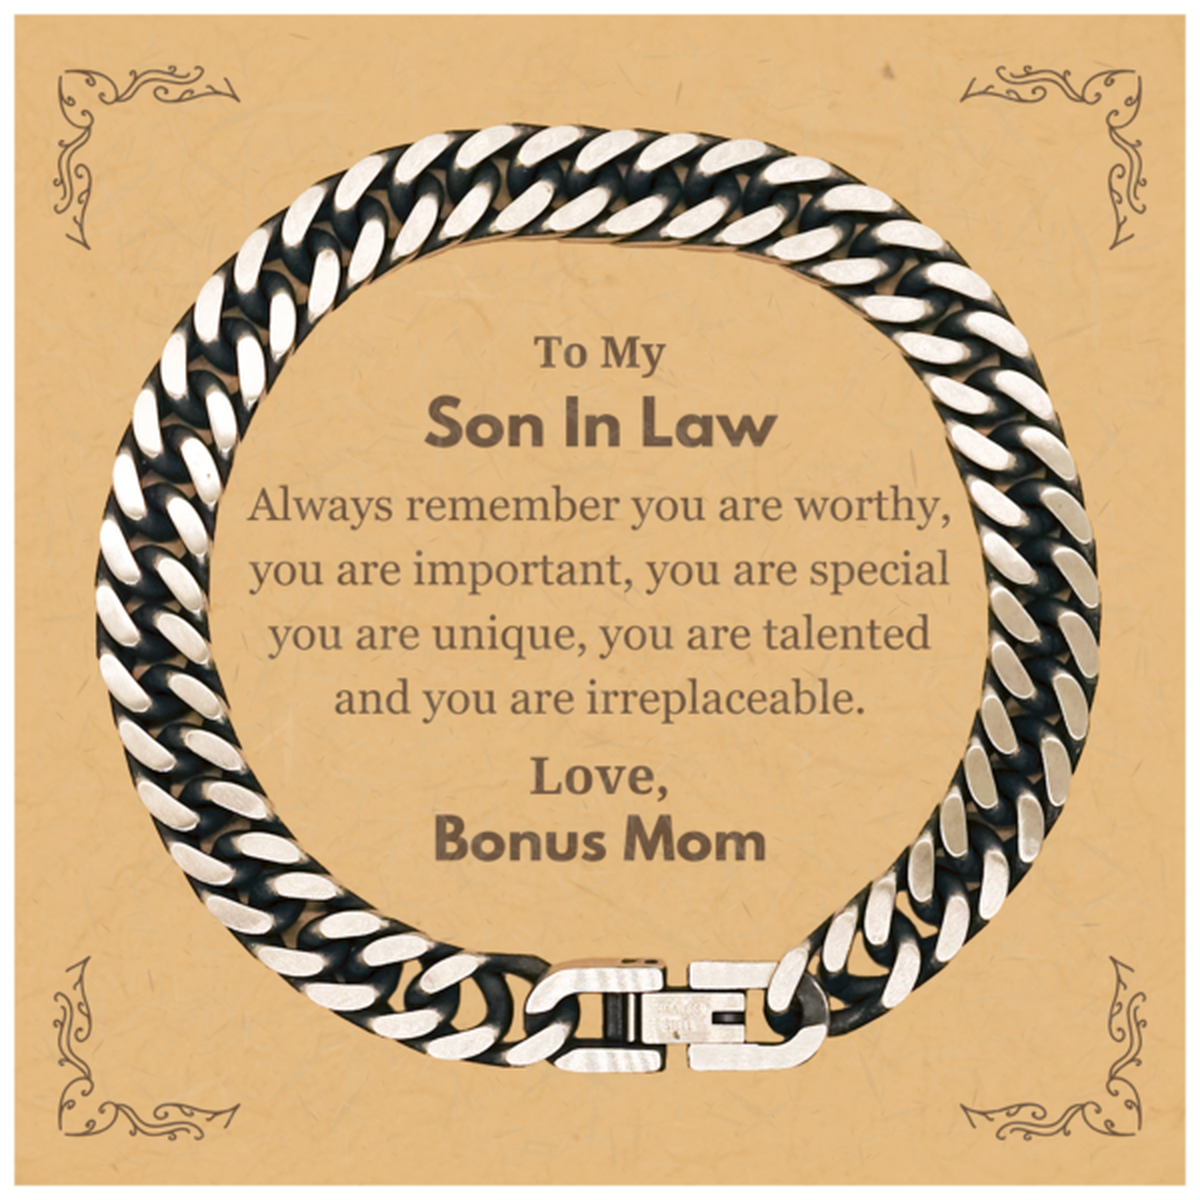 Son In Law Birthday Gifts from Bonus Mom, Inspirational Cuban Link Chain Bracelet for Son In Law Christmas Graduation Gifts for Son In Law Always remember you are worthy, you are important. Love, Bonus Mom